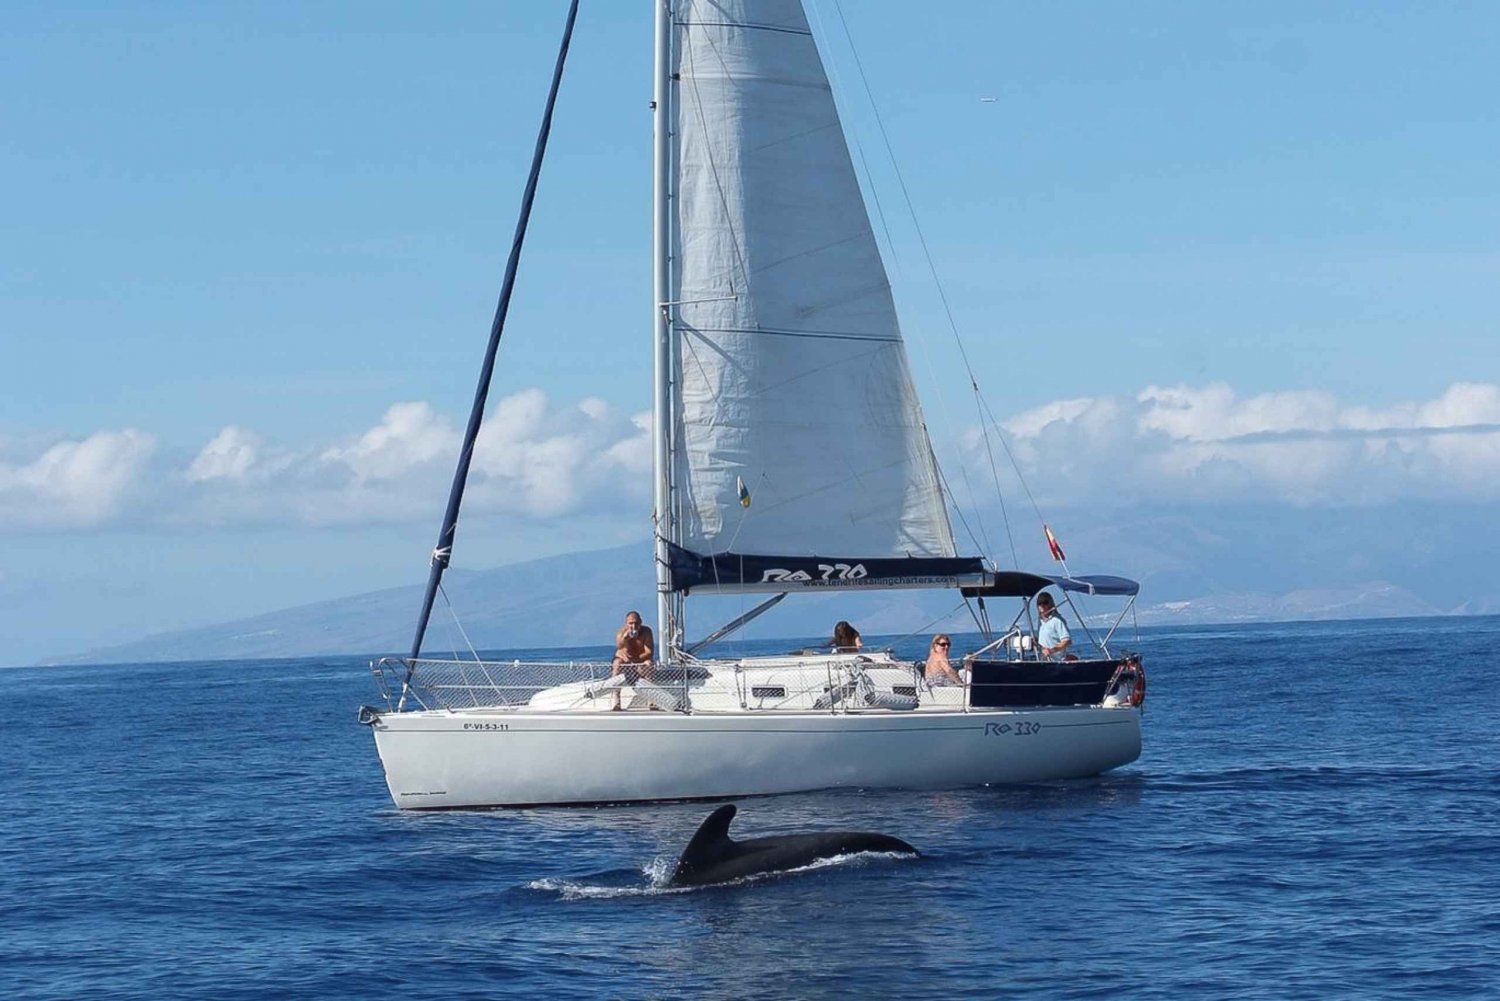 Tenerife: 3 &-6 Hour Private Whale & Dolphin Watching